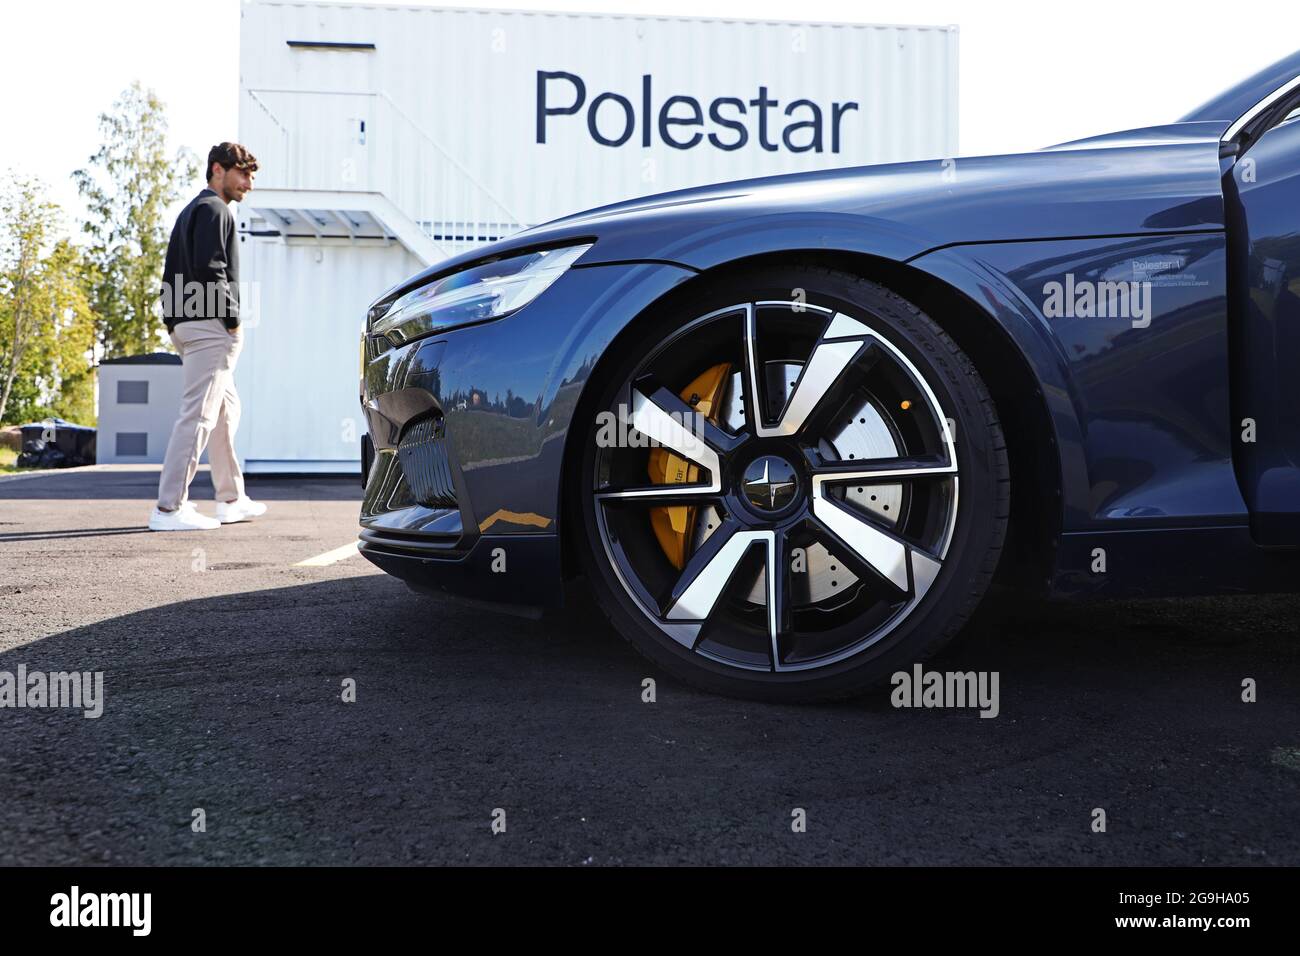 During July, August and September, Volvo Cars and the sister brand Polestar will offer free fast charging for all electric cars in Mjölby. A Polestar 1 at the area. Stock Photo